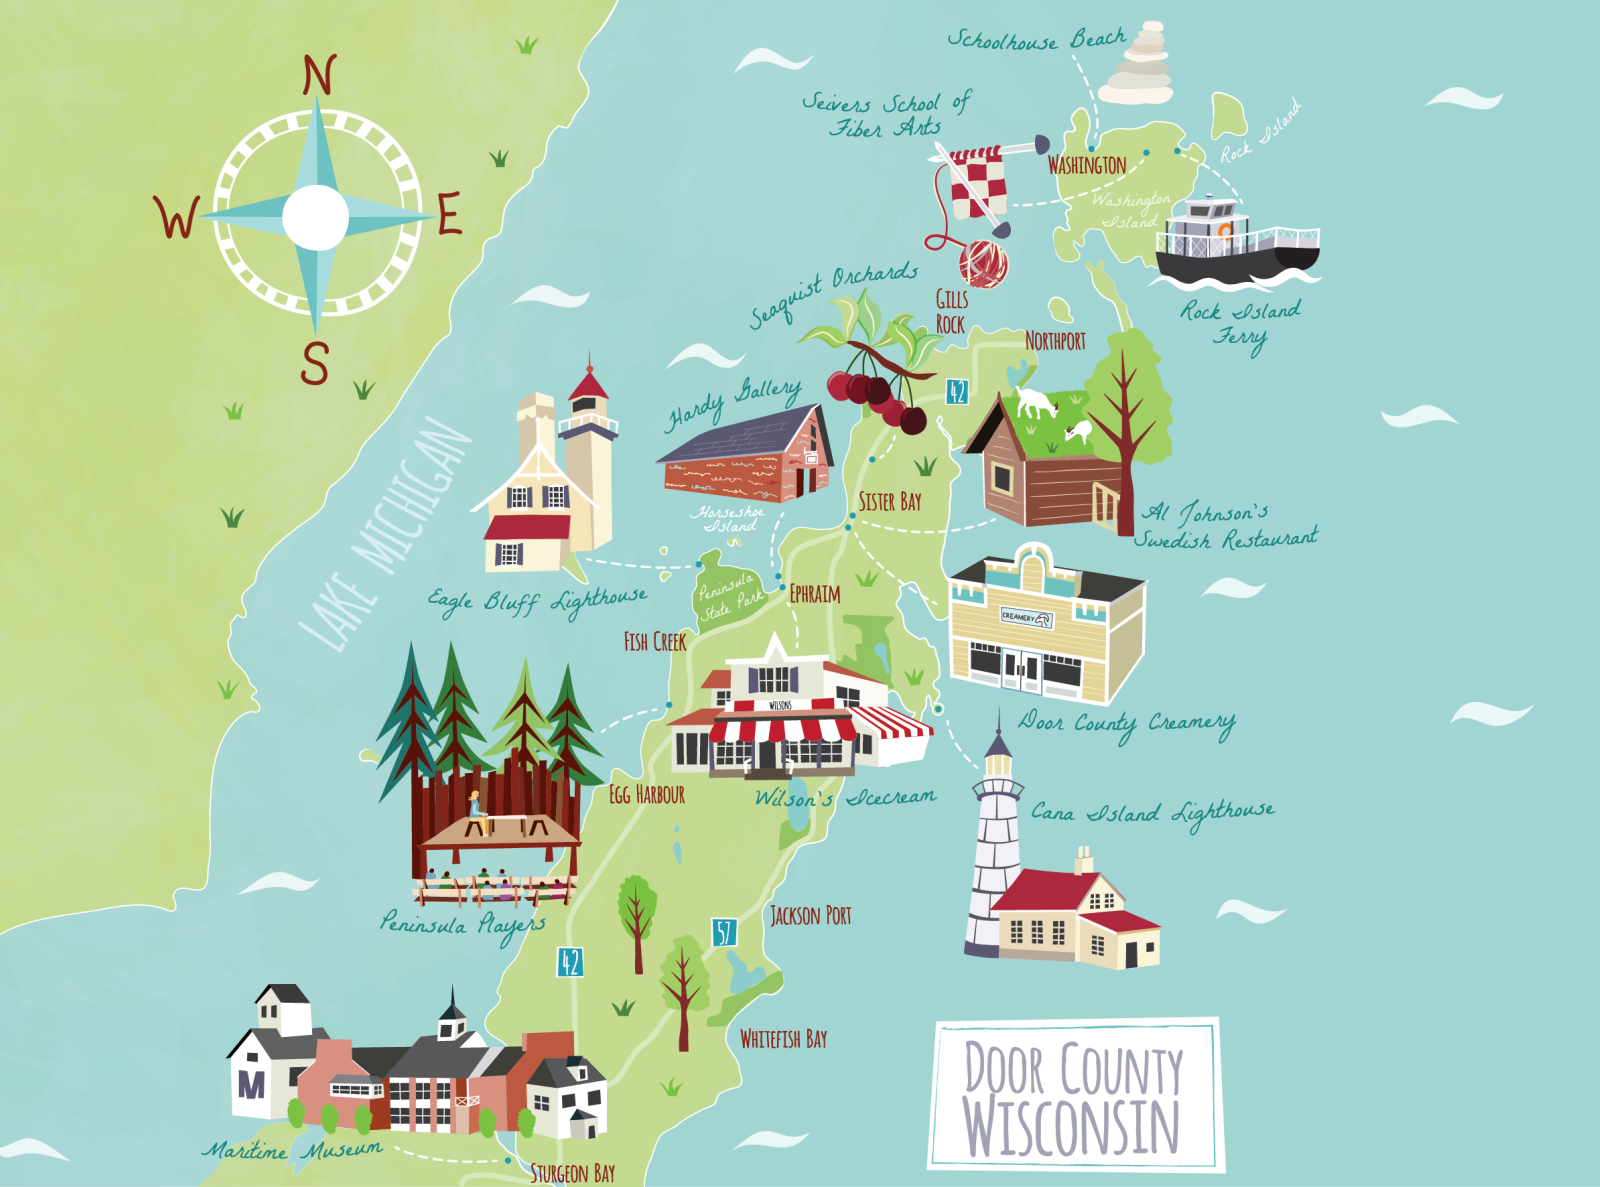 Door County Map for Lands End Clothing by Bek Cruddace on Dribbble